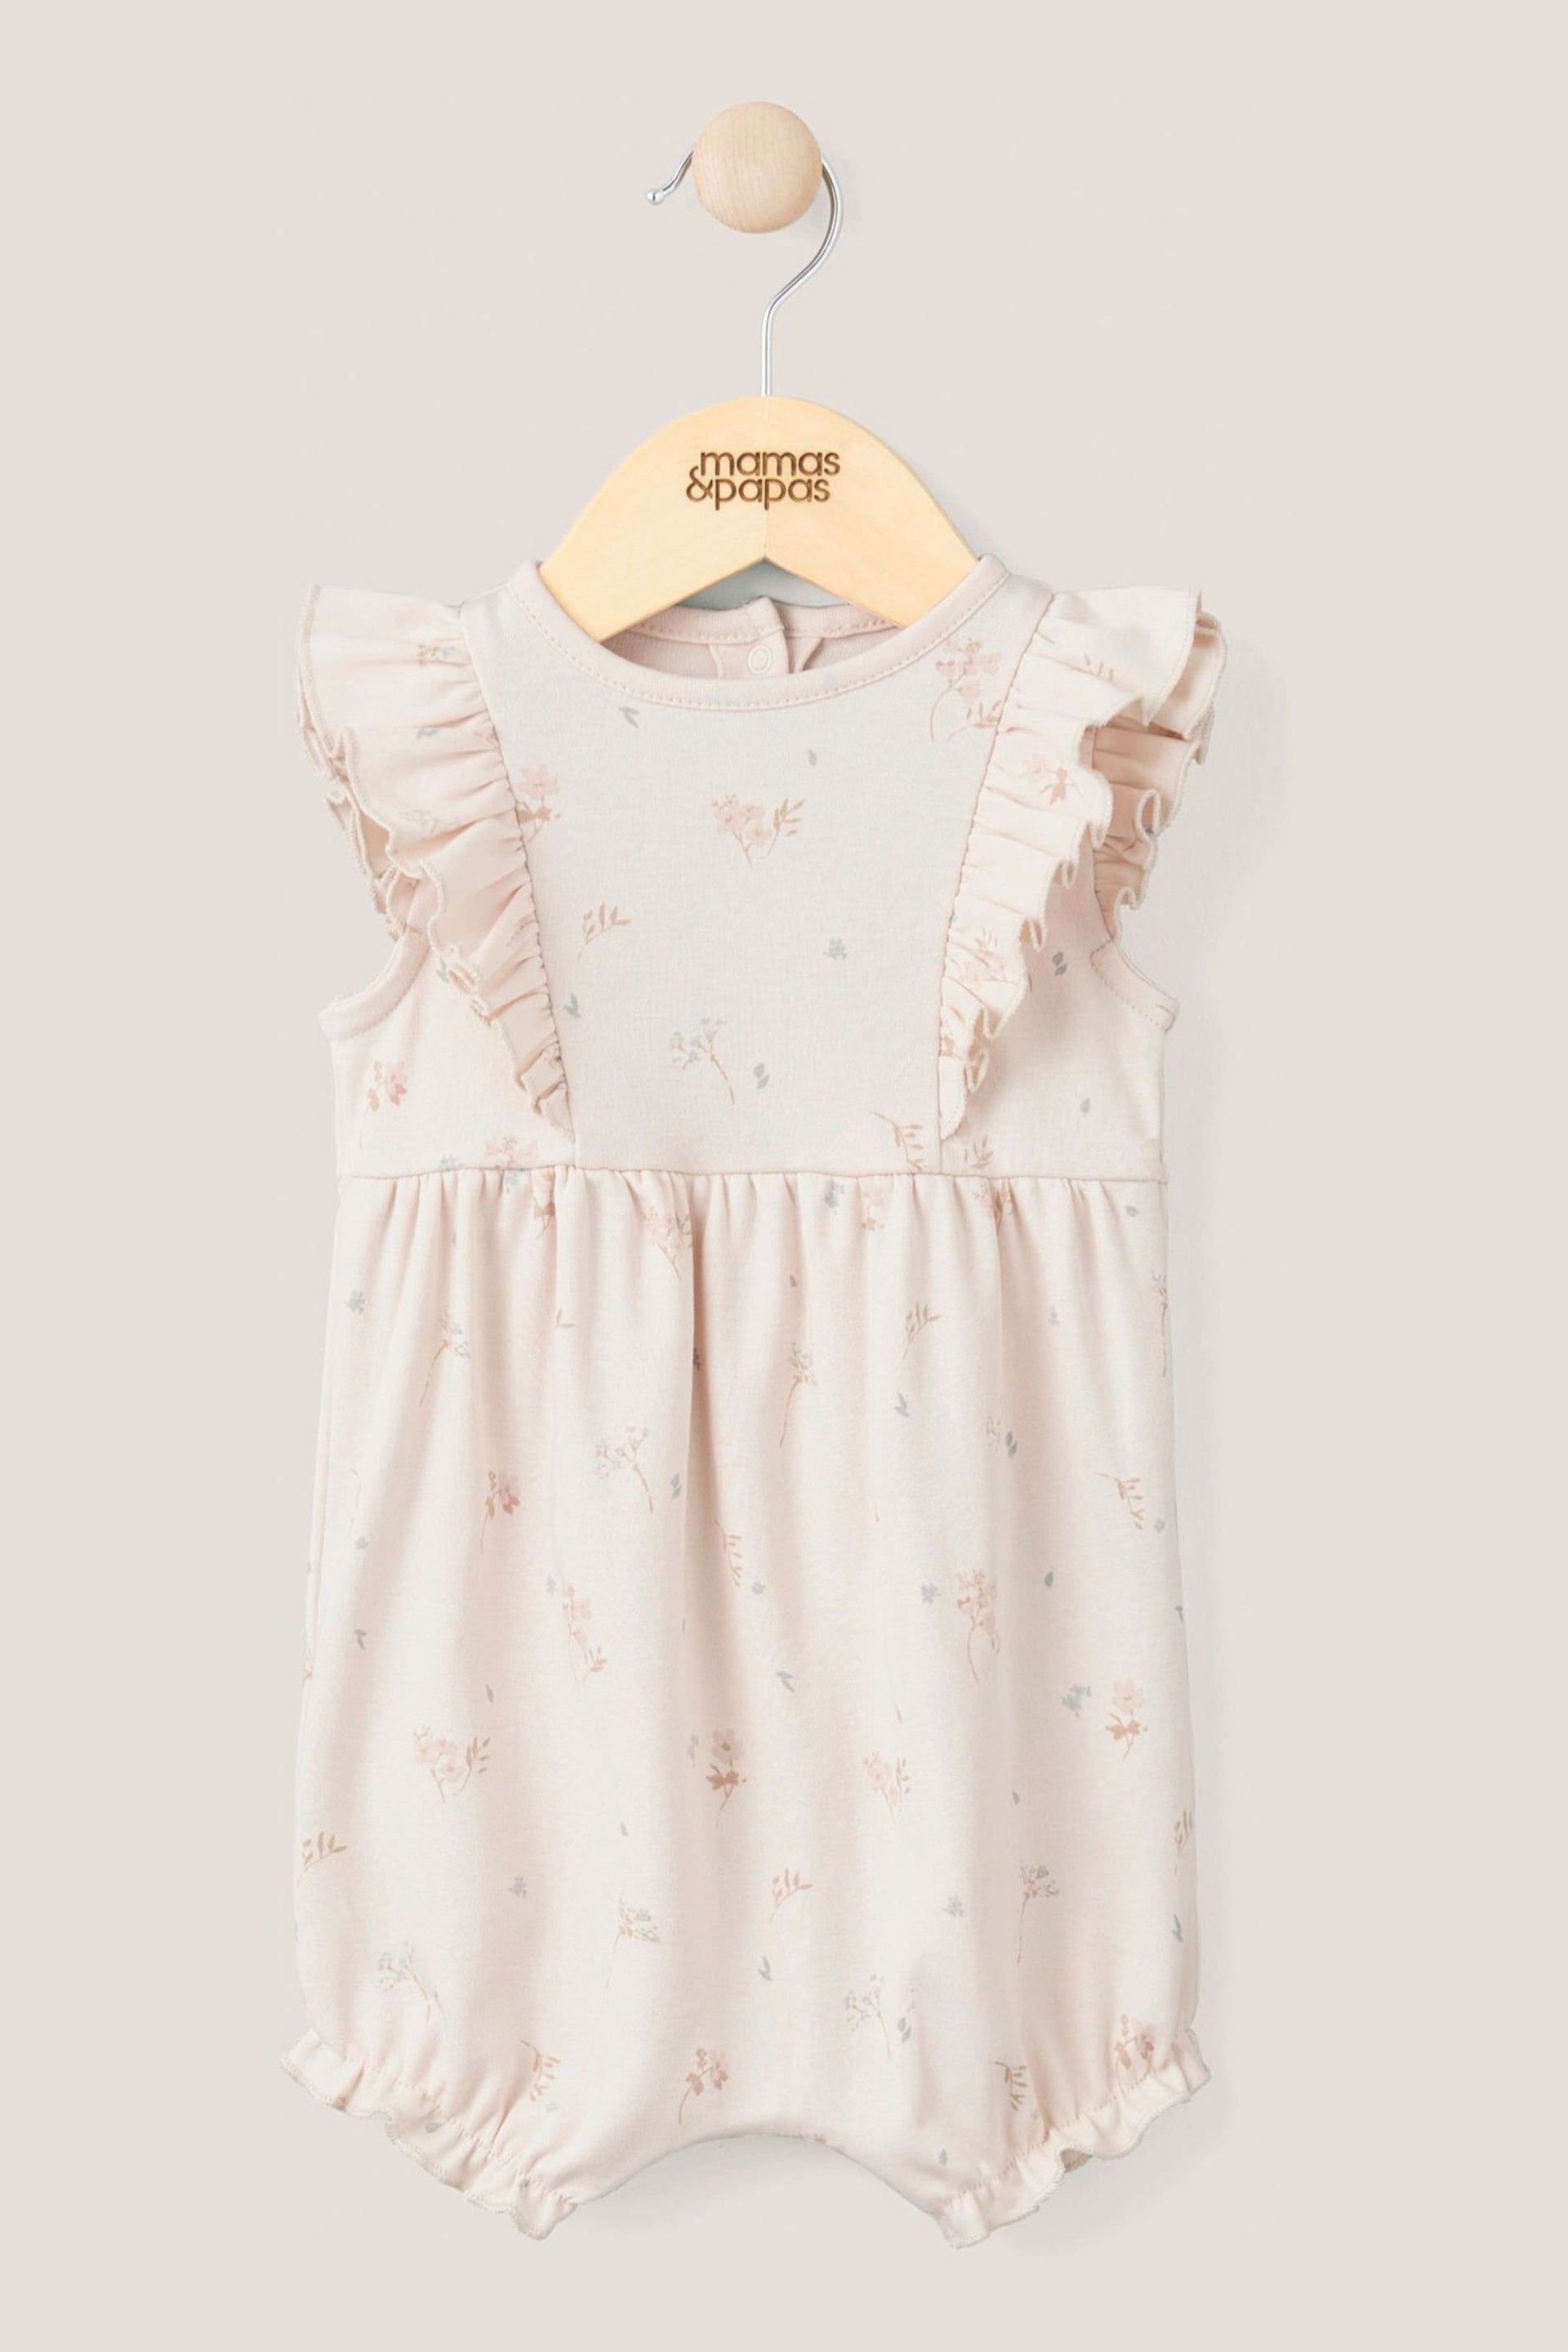 Mamas & Papas Pink Floral Frill Jersey Shortie Romper - Image 1 of 3